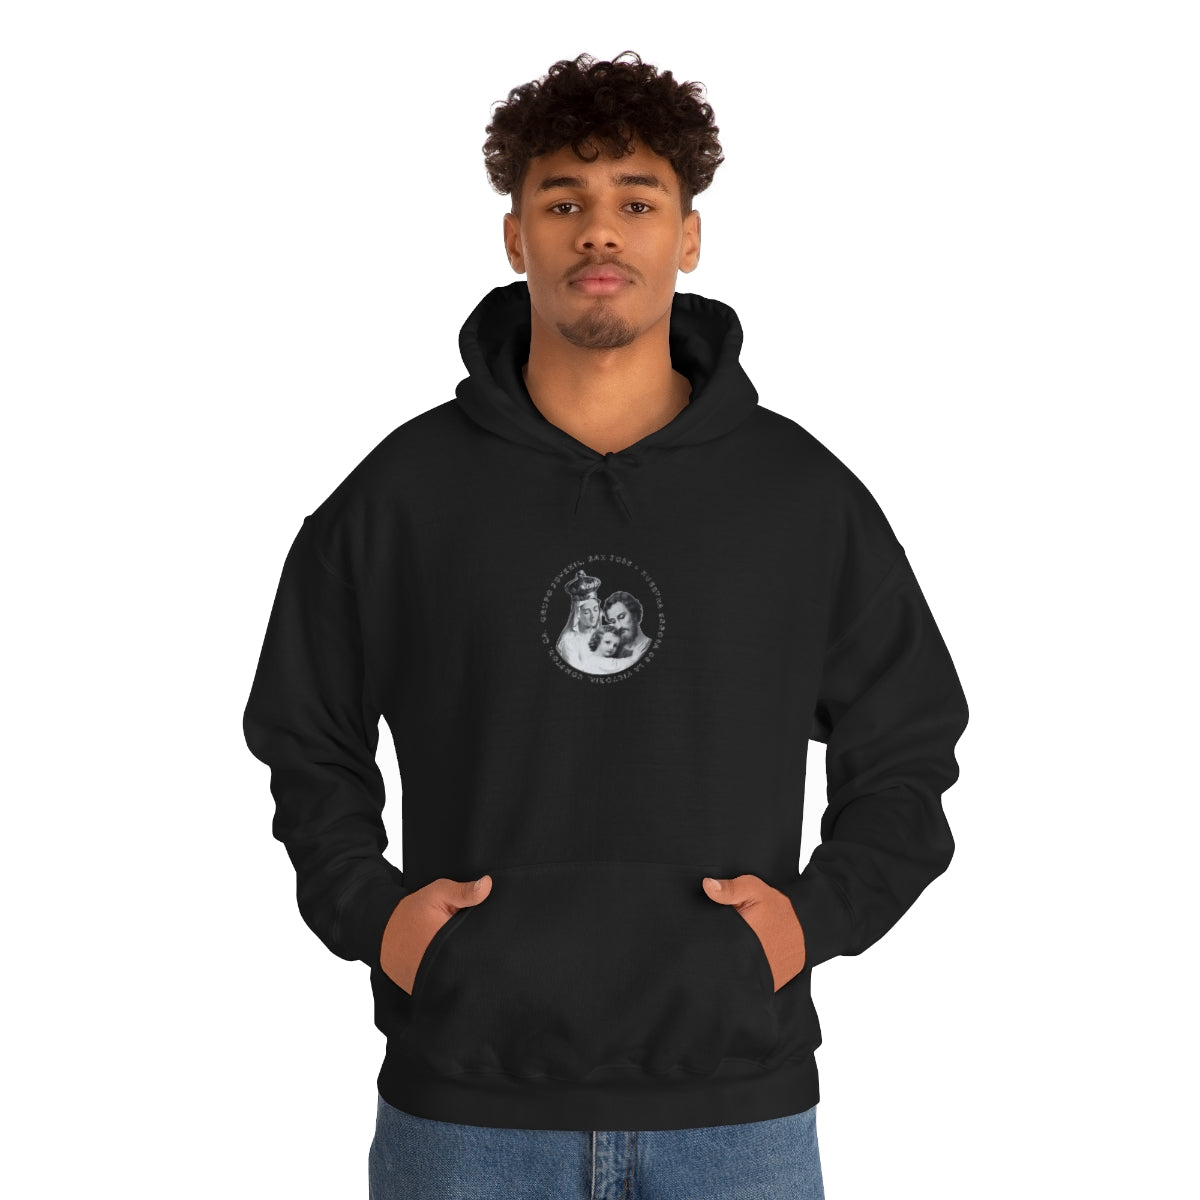 Our Lady of Victory Unisex Heavy Blend™ Hooded Sweatshirt